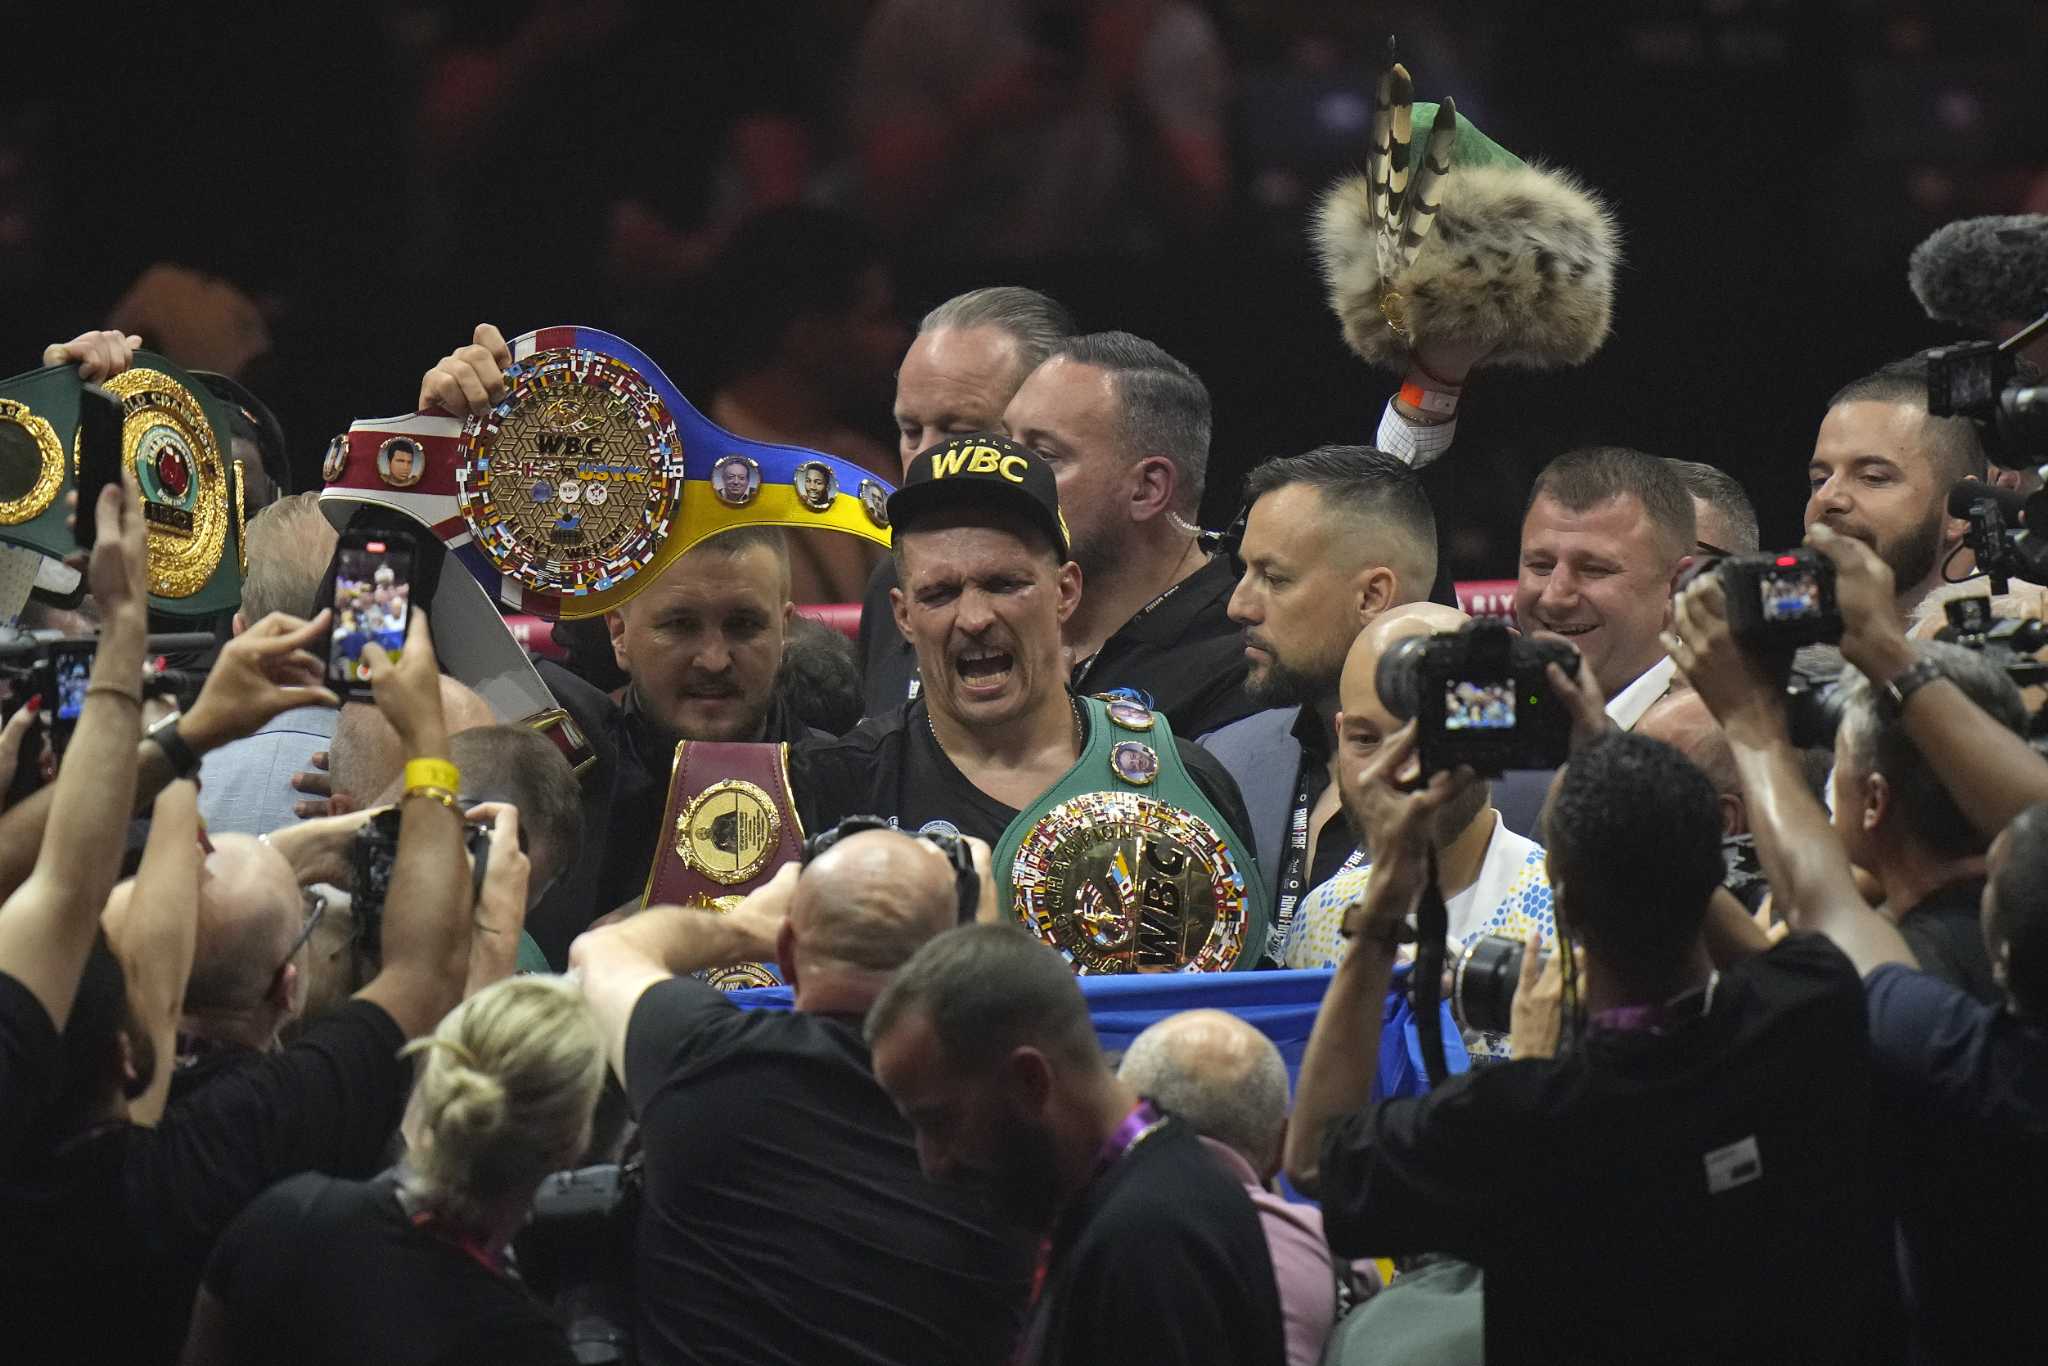 Undisputed heavyweight boxing champ Oleksandr Usyk considers cruiserweight return after Fury rematch